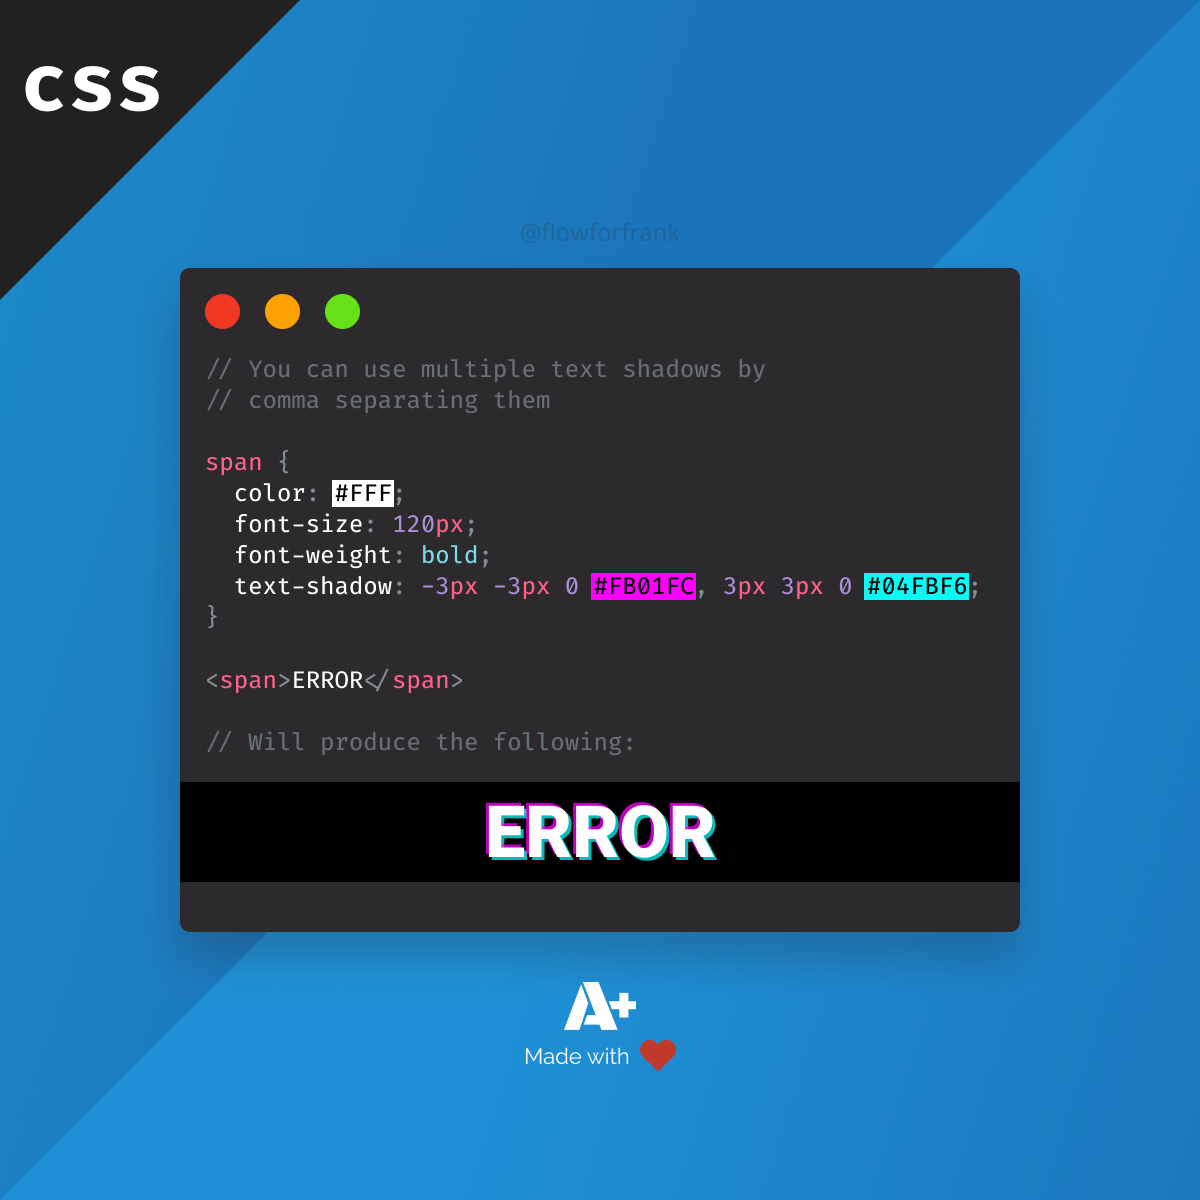 How to Use Multiple Text Shadows in CSS